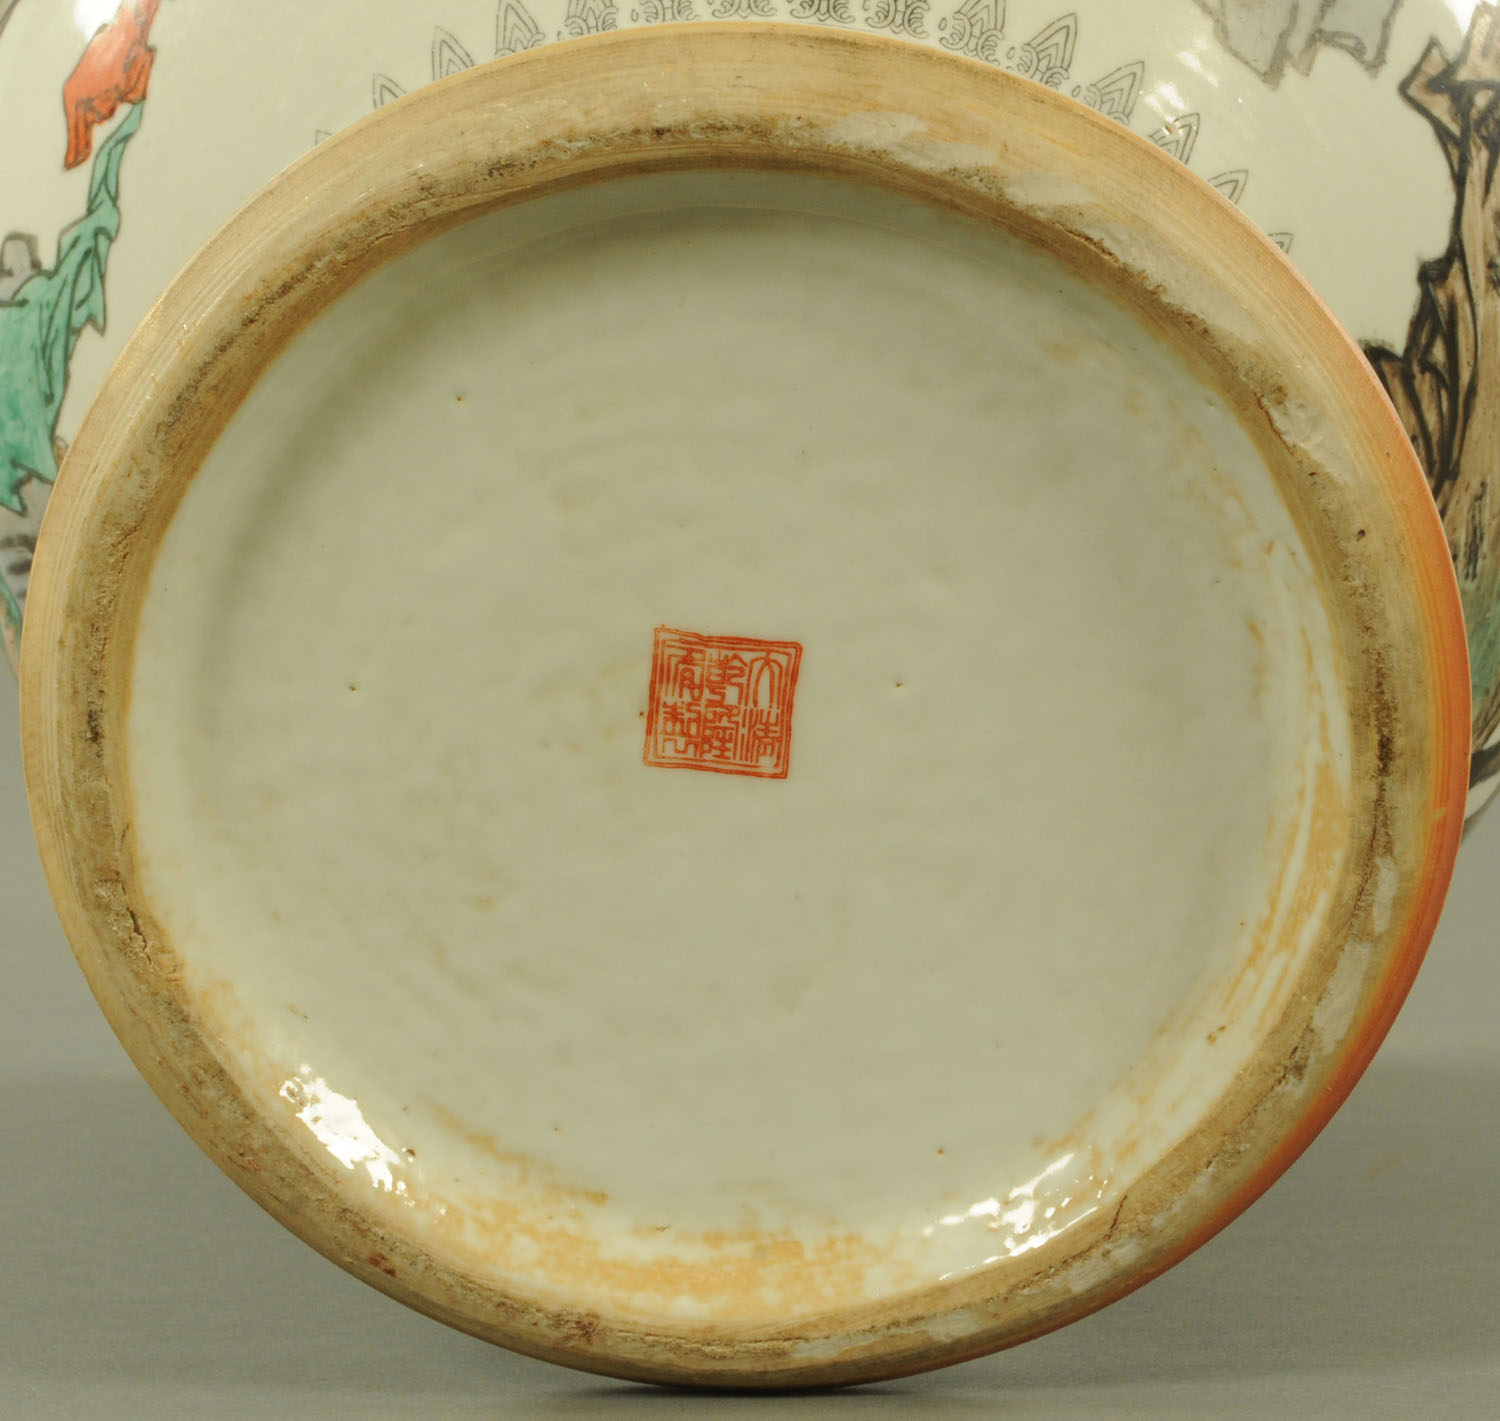 A Chinese porcelain vase, 20th century, with transfer printed decoration heightened with enamels, - Image 11 of 29